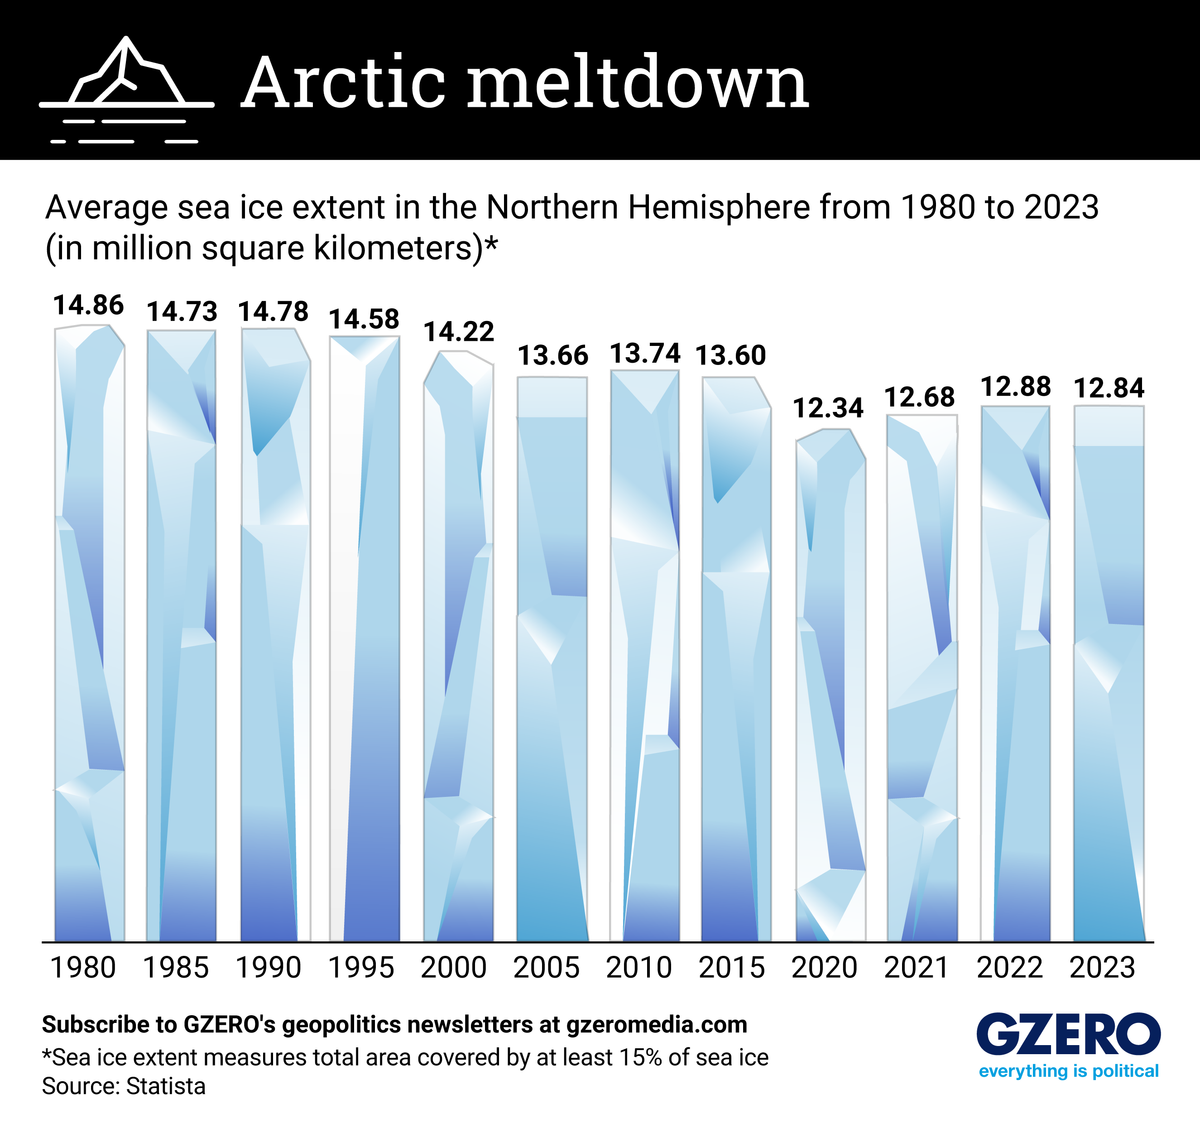 The Graphic Truth: Arctic meltdown